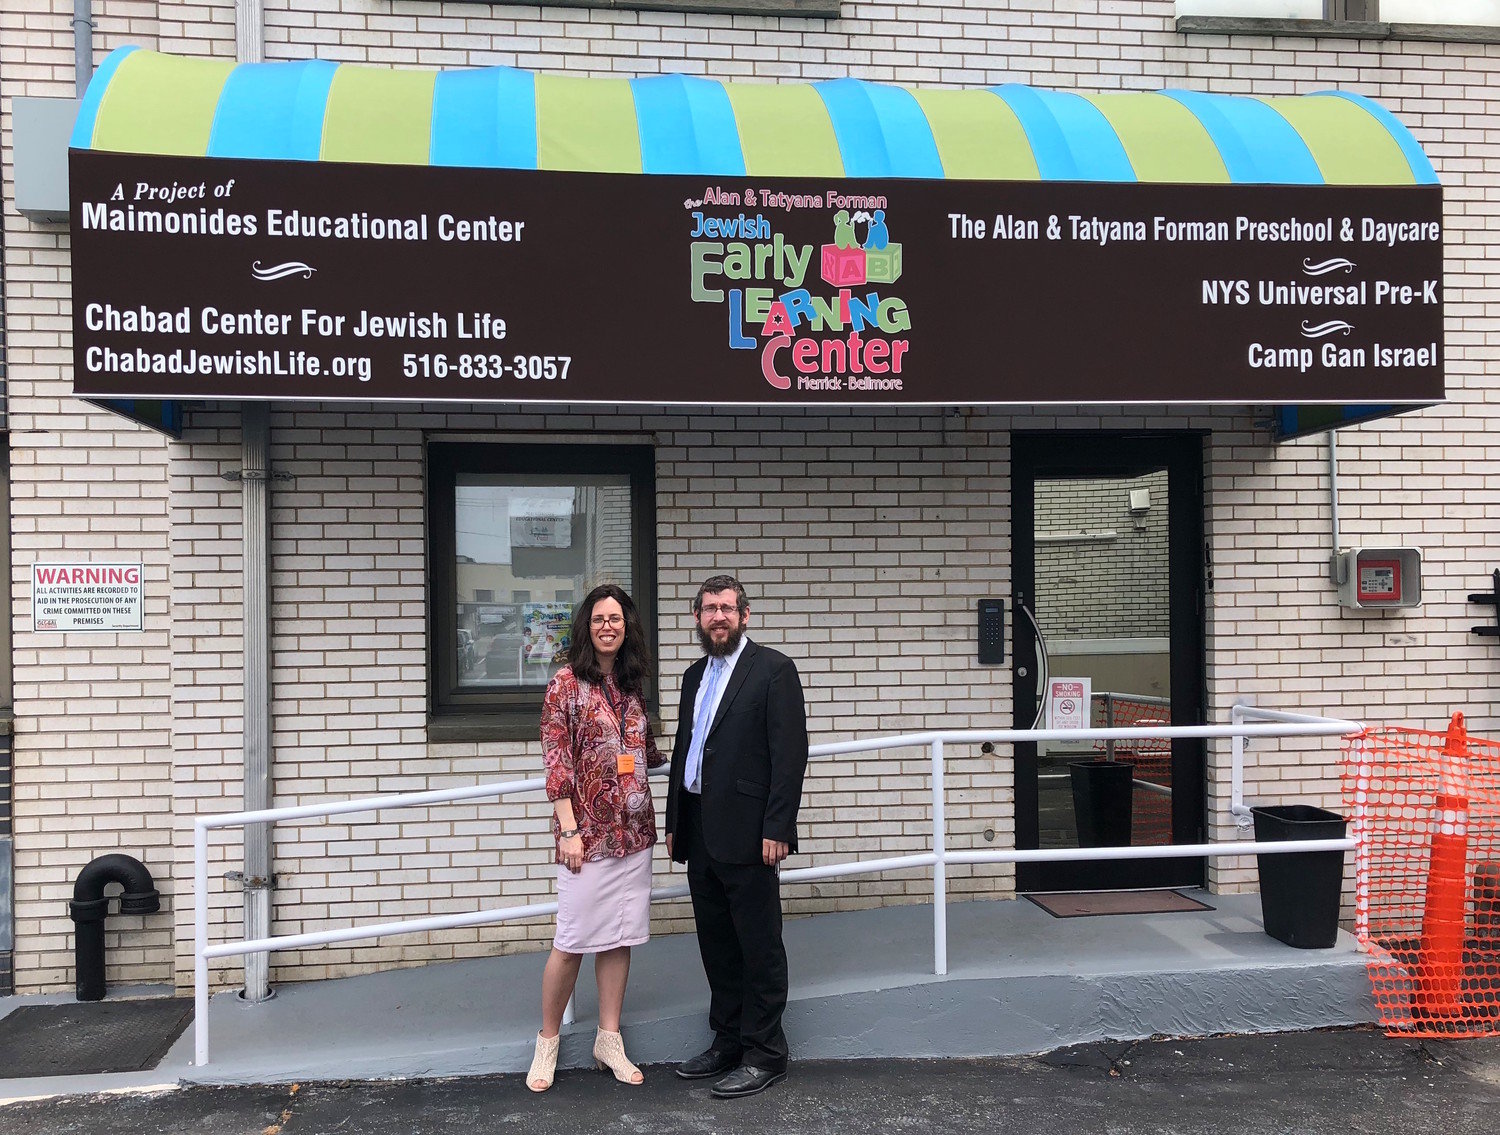 Rabbi Shimon Kramer and his wife, Chanie, at the Chabad Center for Jewish Life’s Jewish Early Learning Center preschool.